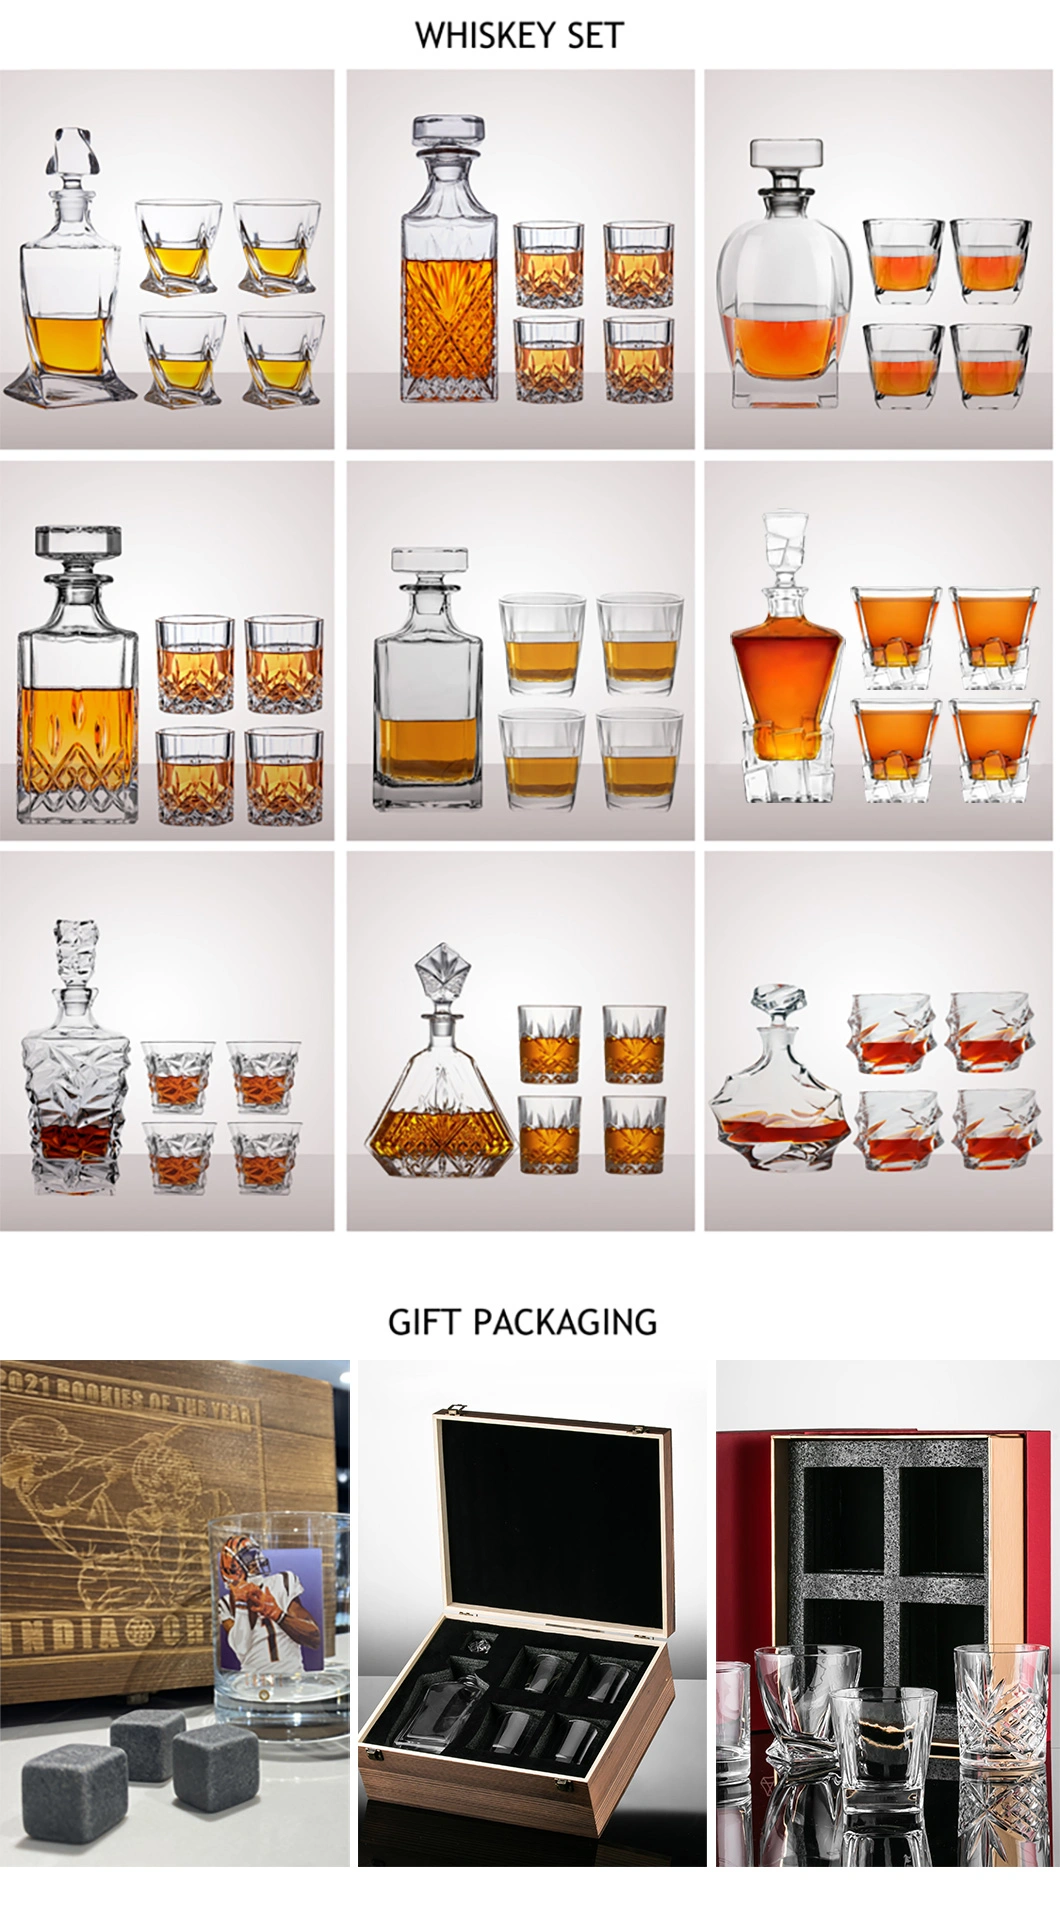 Premium Elegant Hand Crafted Engraved Crystal Glass Whisky Decanter &amp; Whiskey Glasses Set in Leather Gift Box